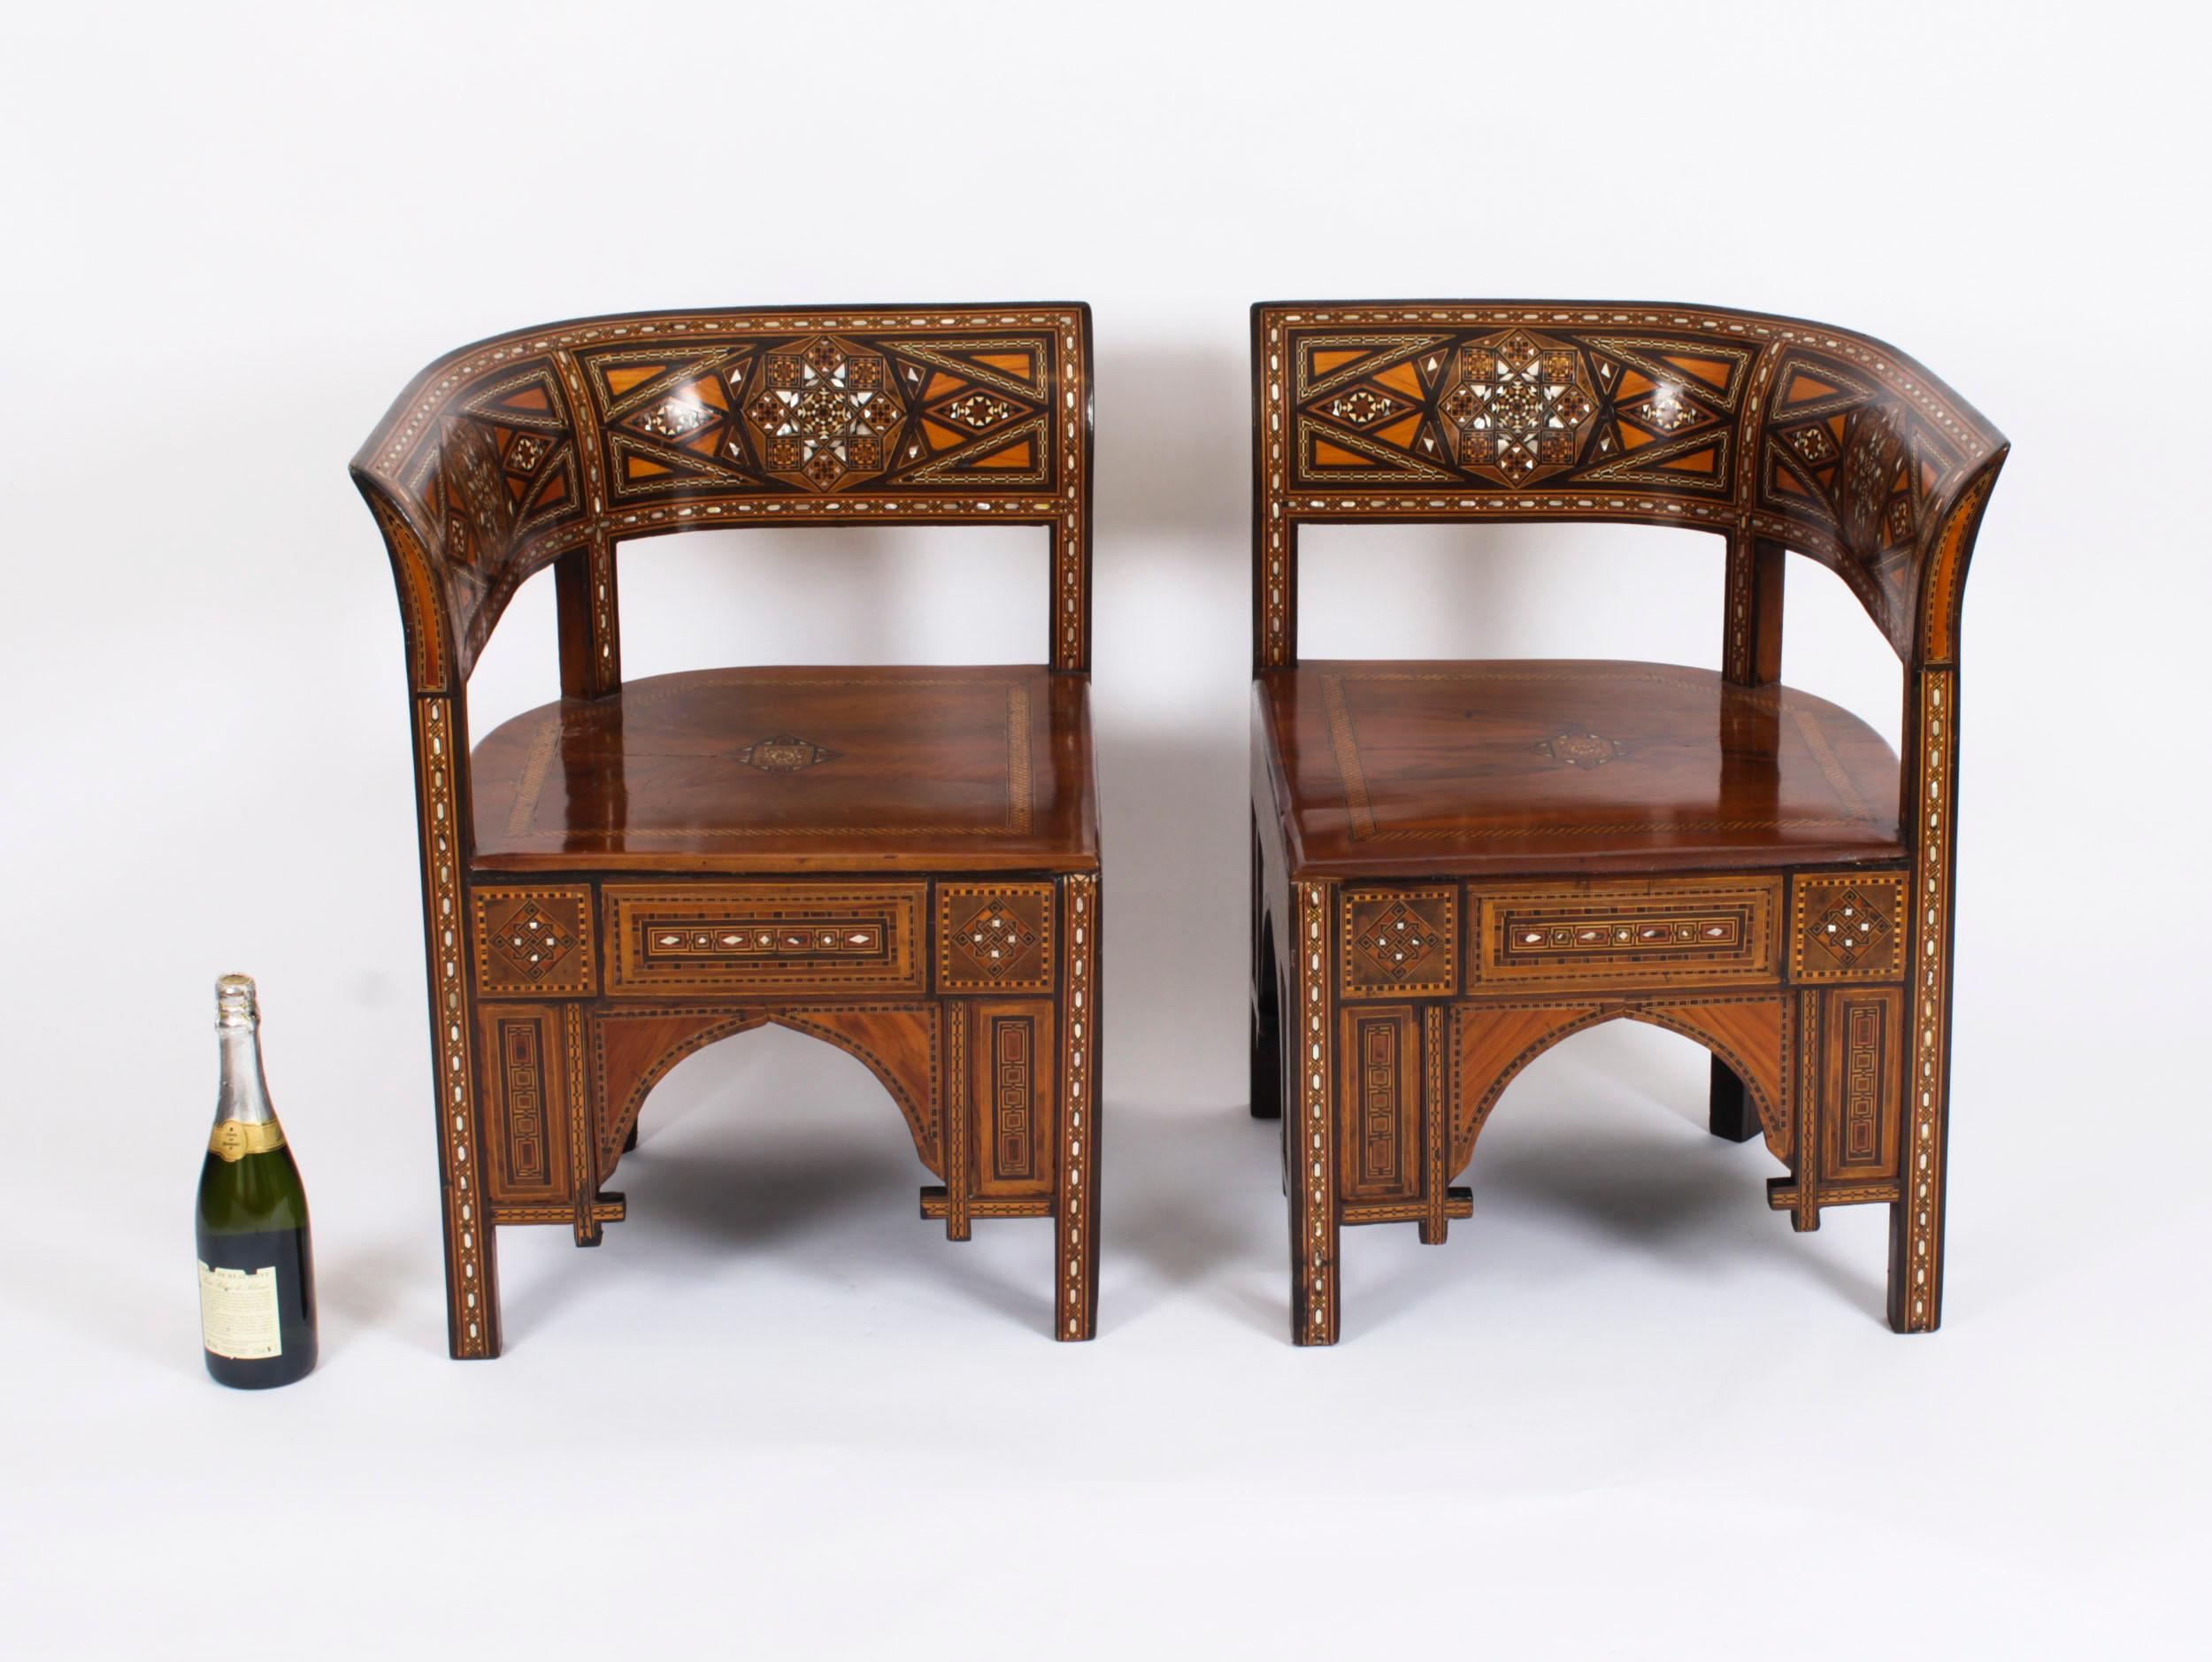 Antique Pair of Syrian Parquetry Inlaid Armchairs C1900 For Sale 13